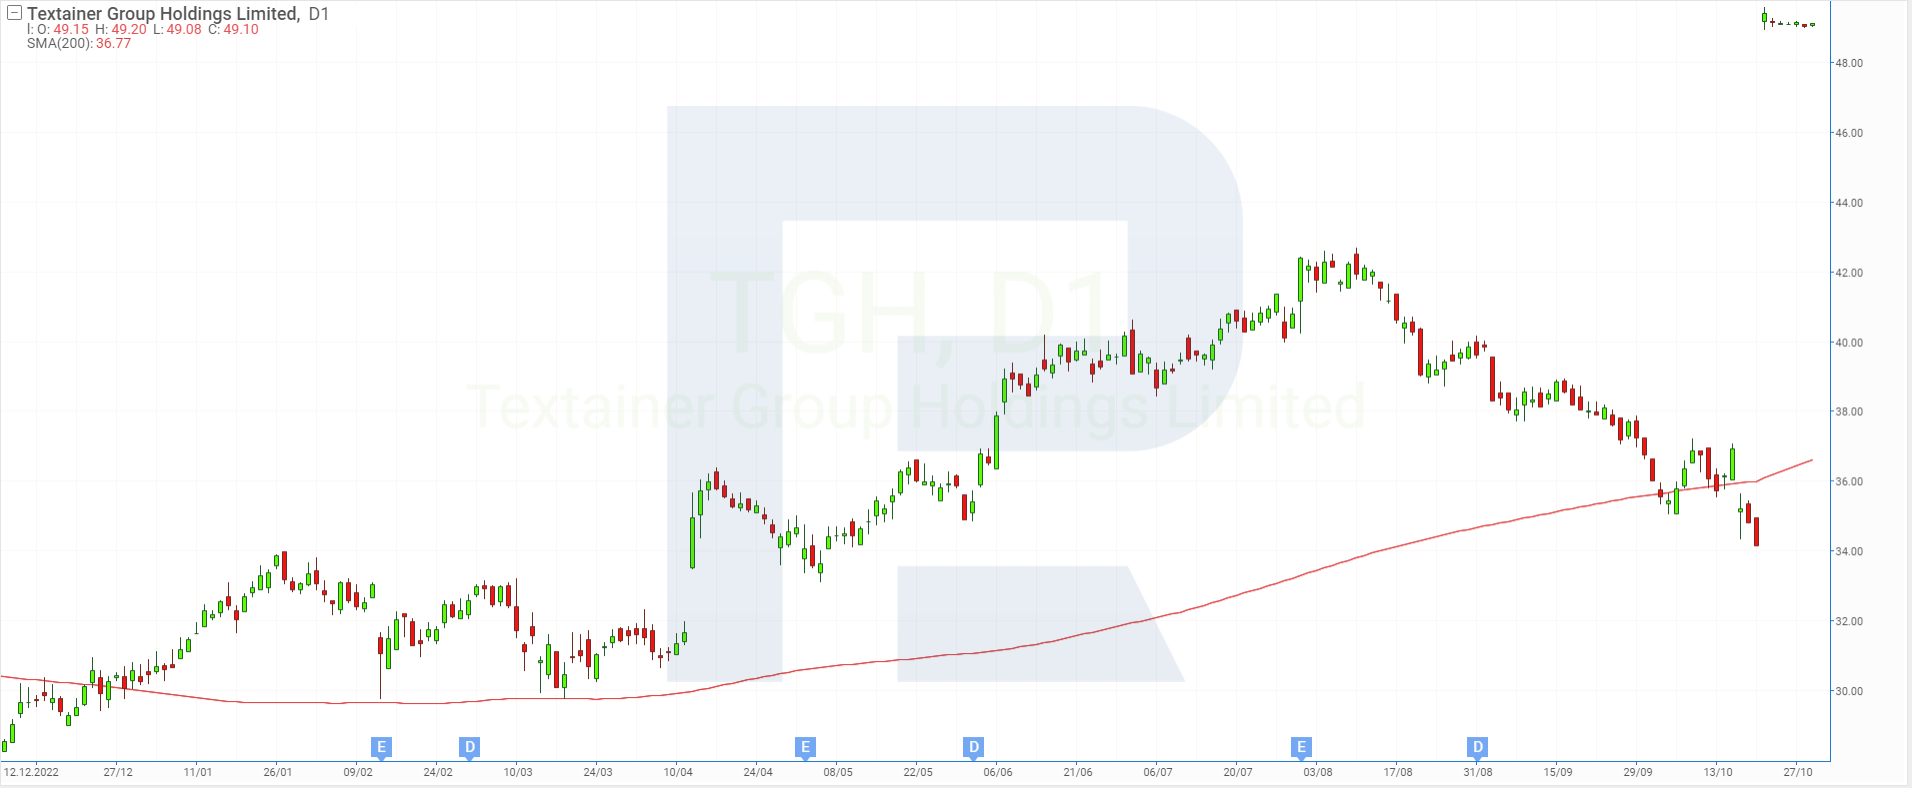 Stock chart of Textainer Group Holdings Limited